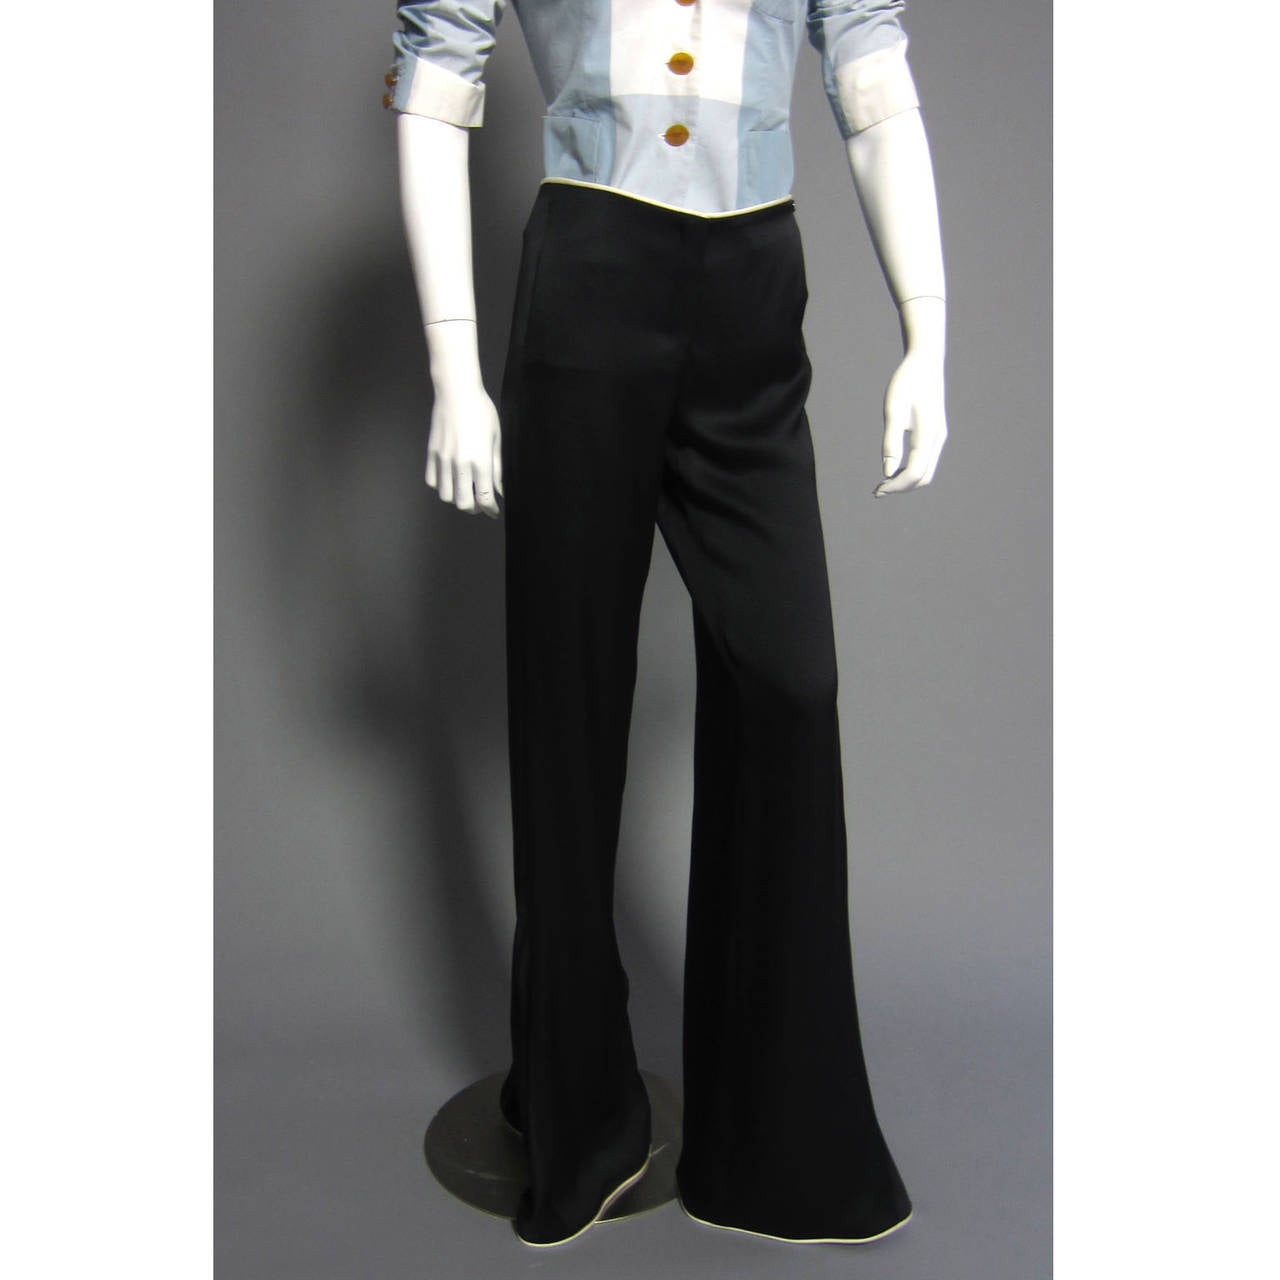 Classic, Chic, CHANEL. These silk pants are designed to sit low on the hips. An additional panel of fabric creates a wide leg.  The waist and bottom hem are trimmed in beige silk pipping. Front Zipper Closure. A small, black CC logo pendant rests